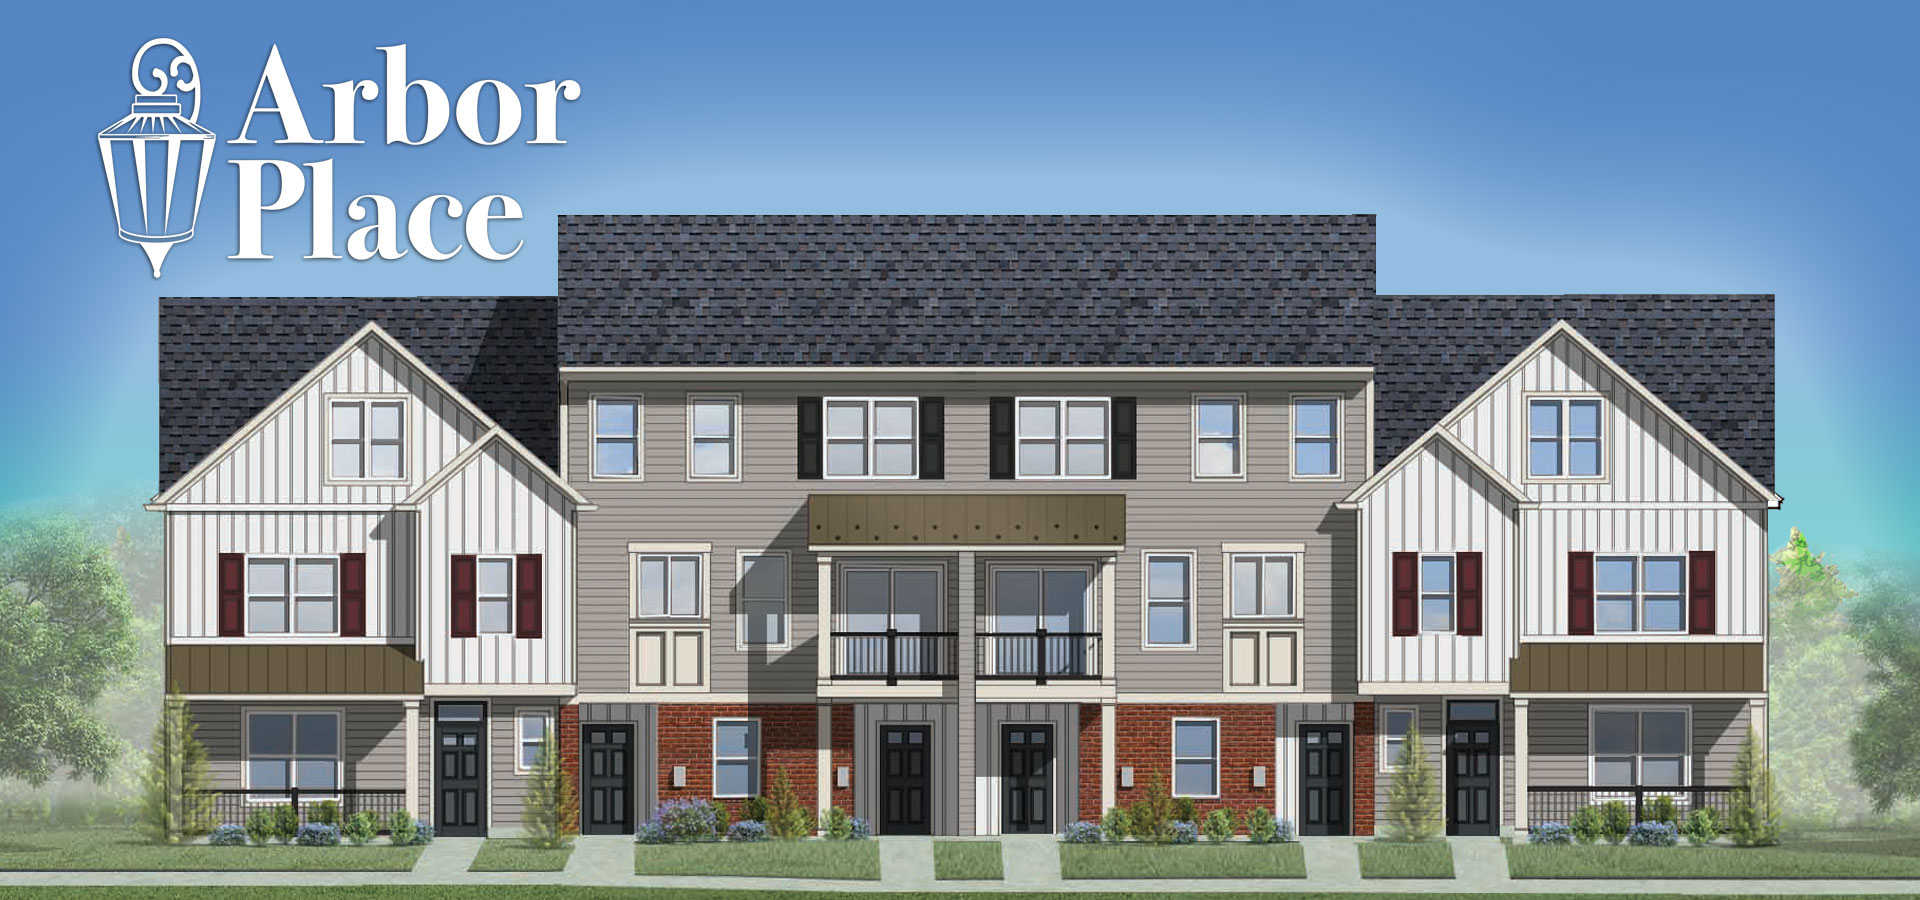 Arbor Place Norristown townhome elevation illustration